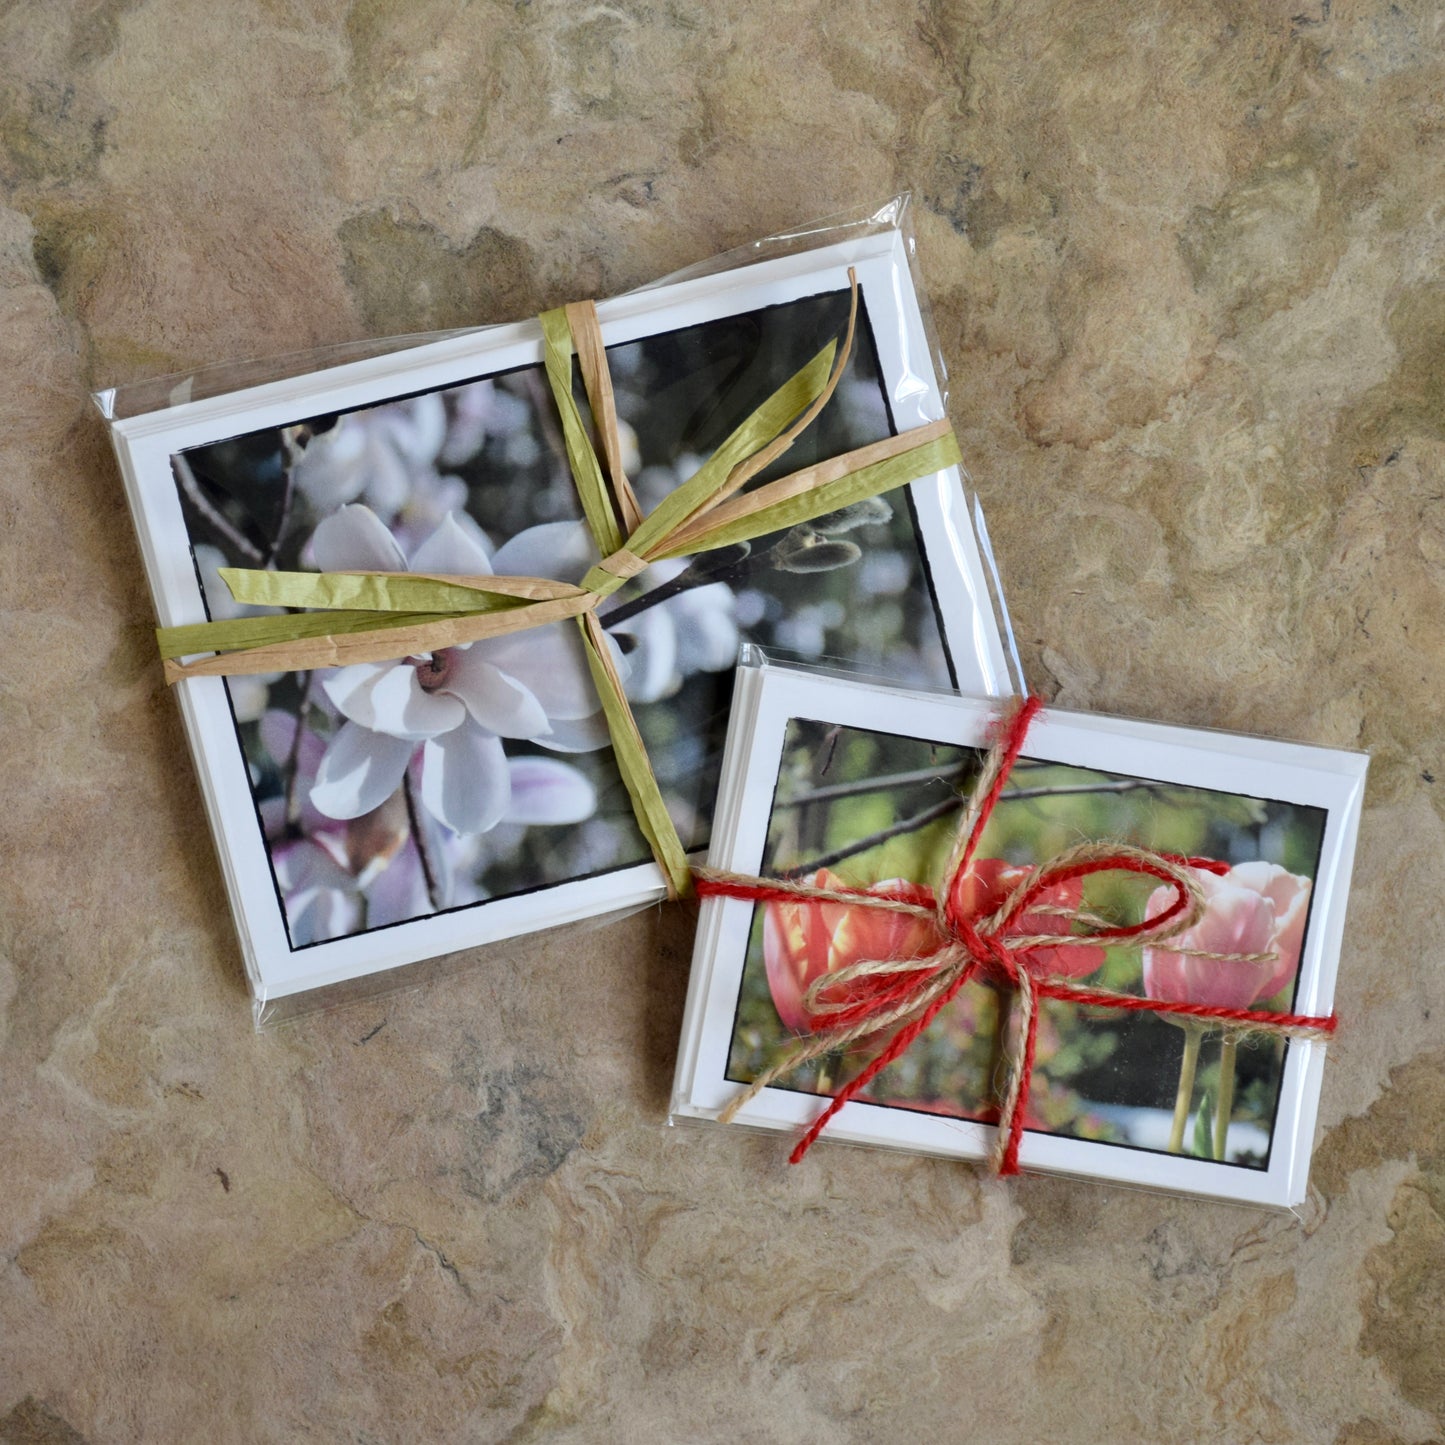 Spring Greeting Cards - Eco-Friendly, Handprinted Floral Spring Cards